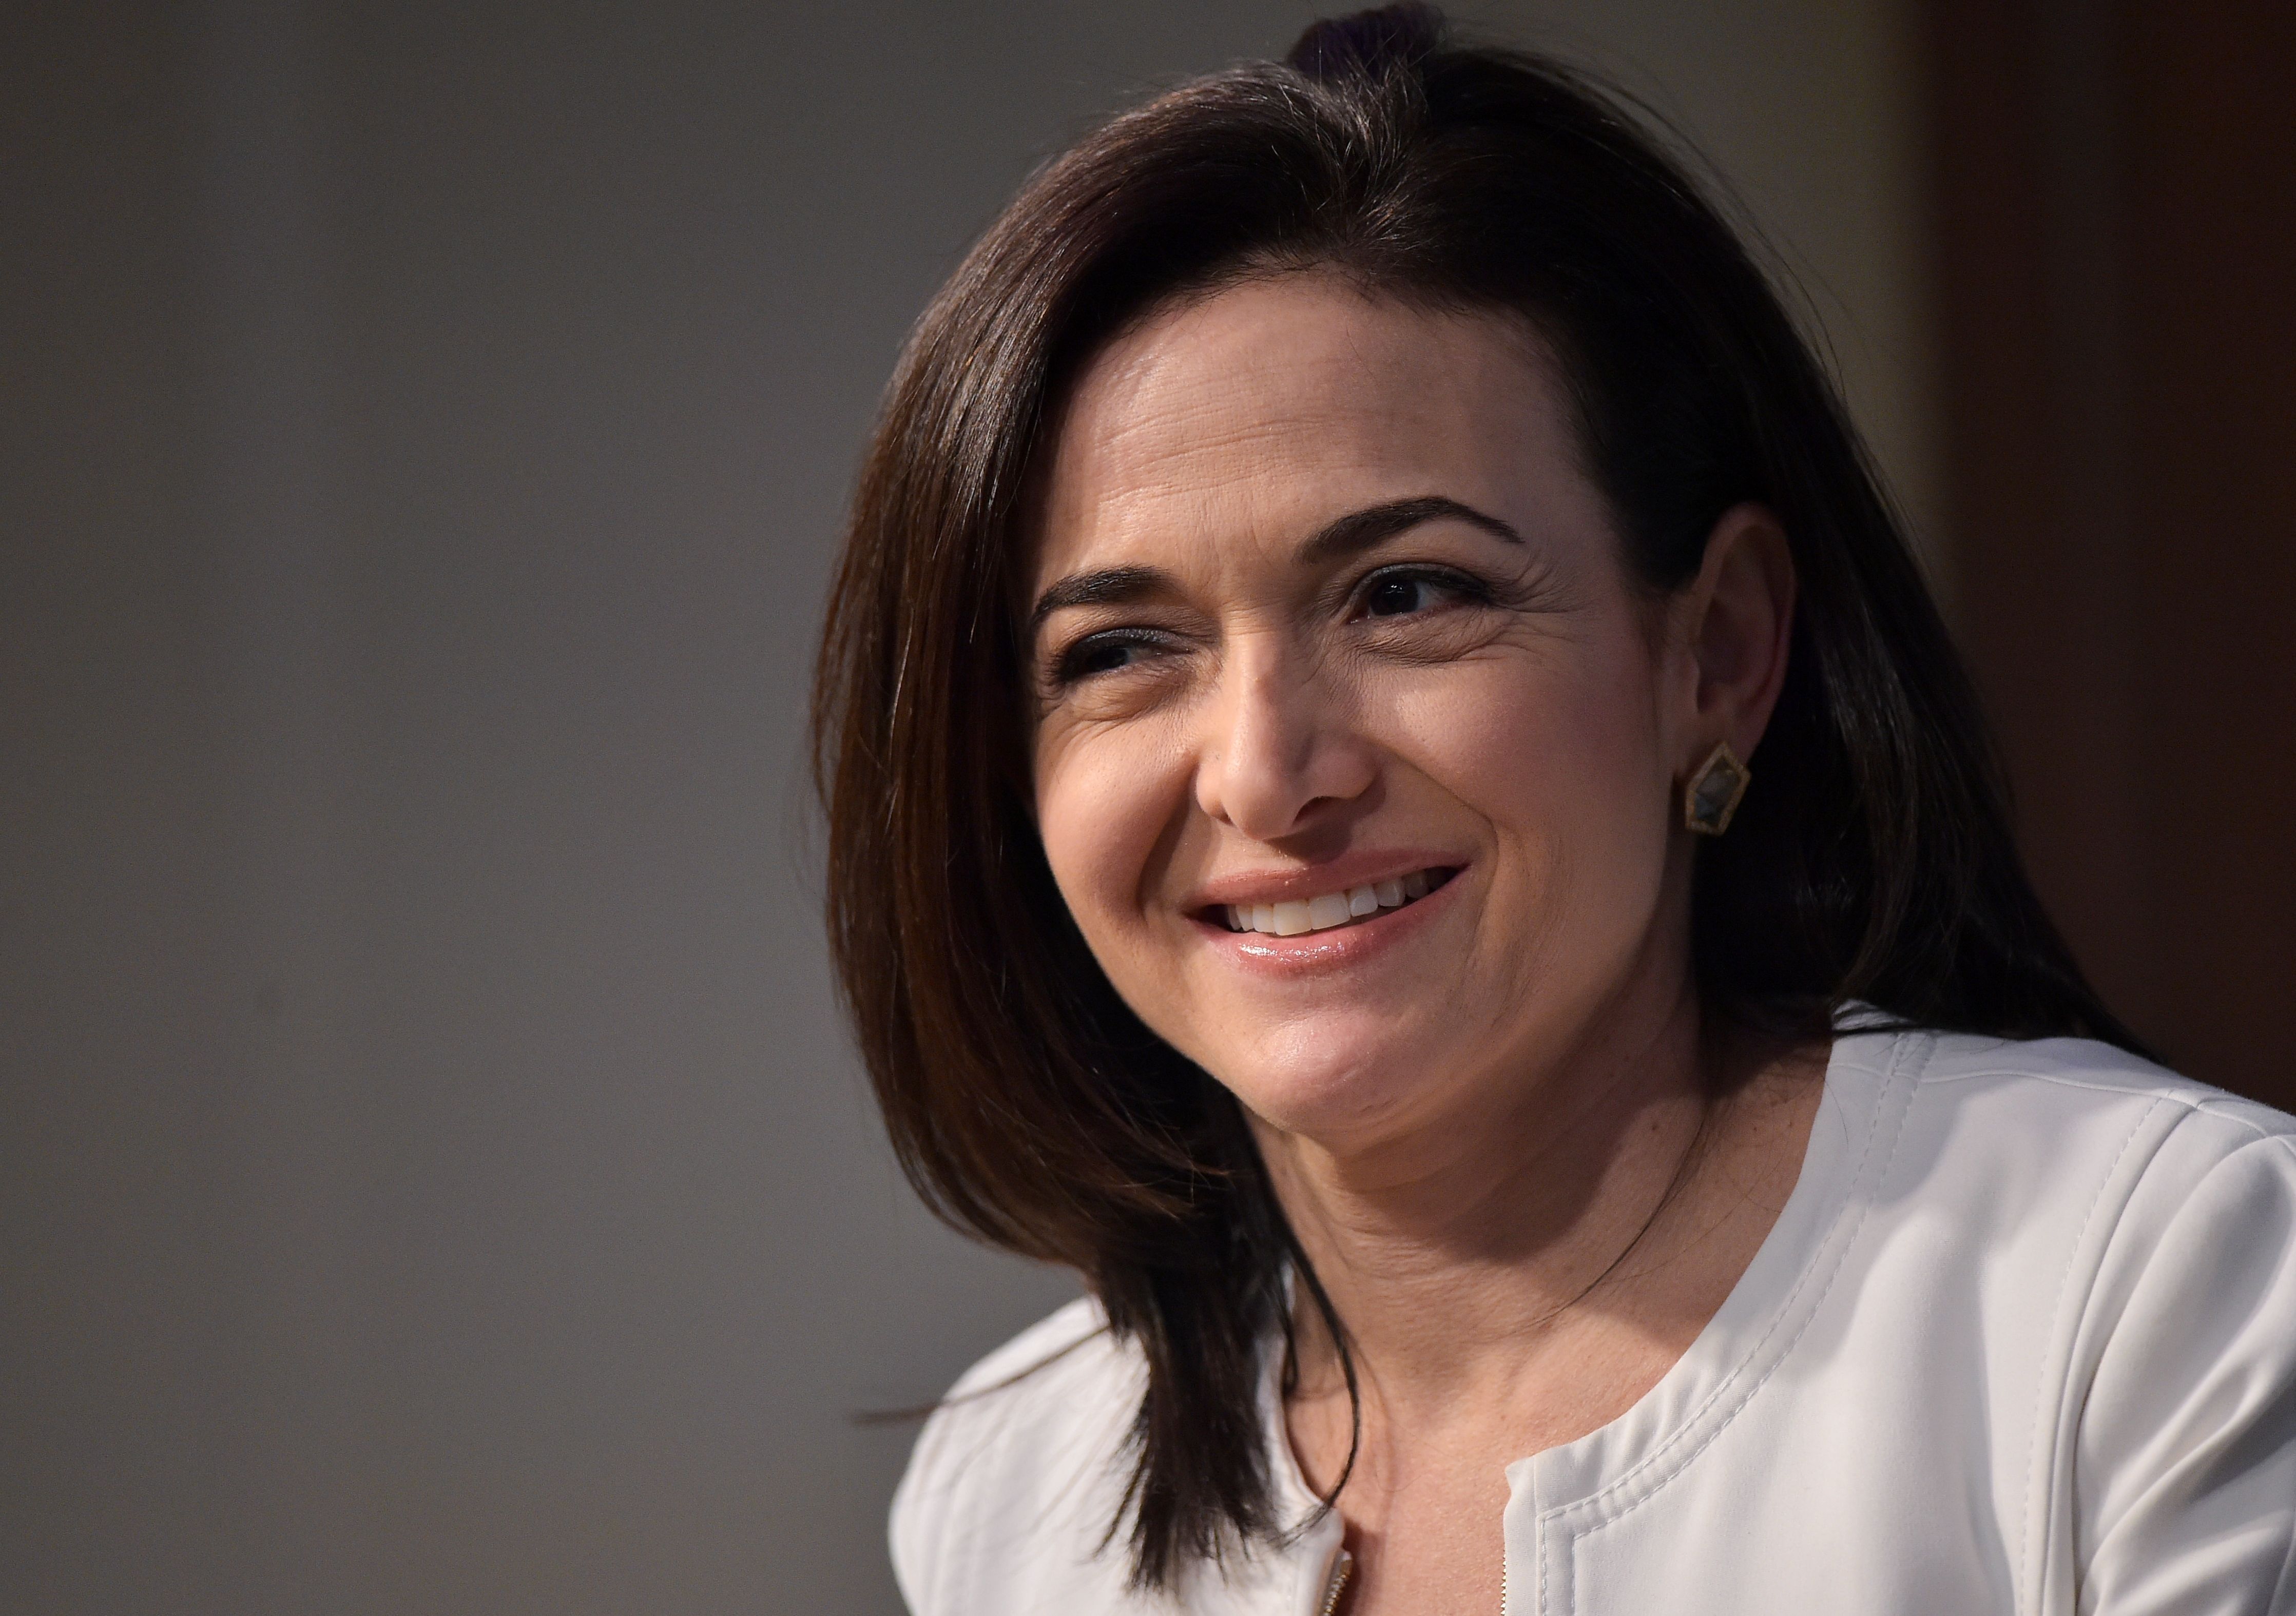 Facebook Chief Operating Officer Sheryl Sandberg speaks at the The American Enterprise Institute for Public Policy Research on June 22, 2016 in Washington, DC. (Mandel Ngan—AFP/Getty Images)